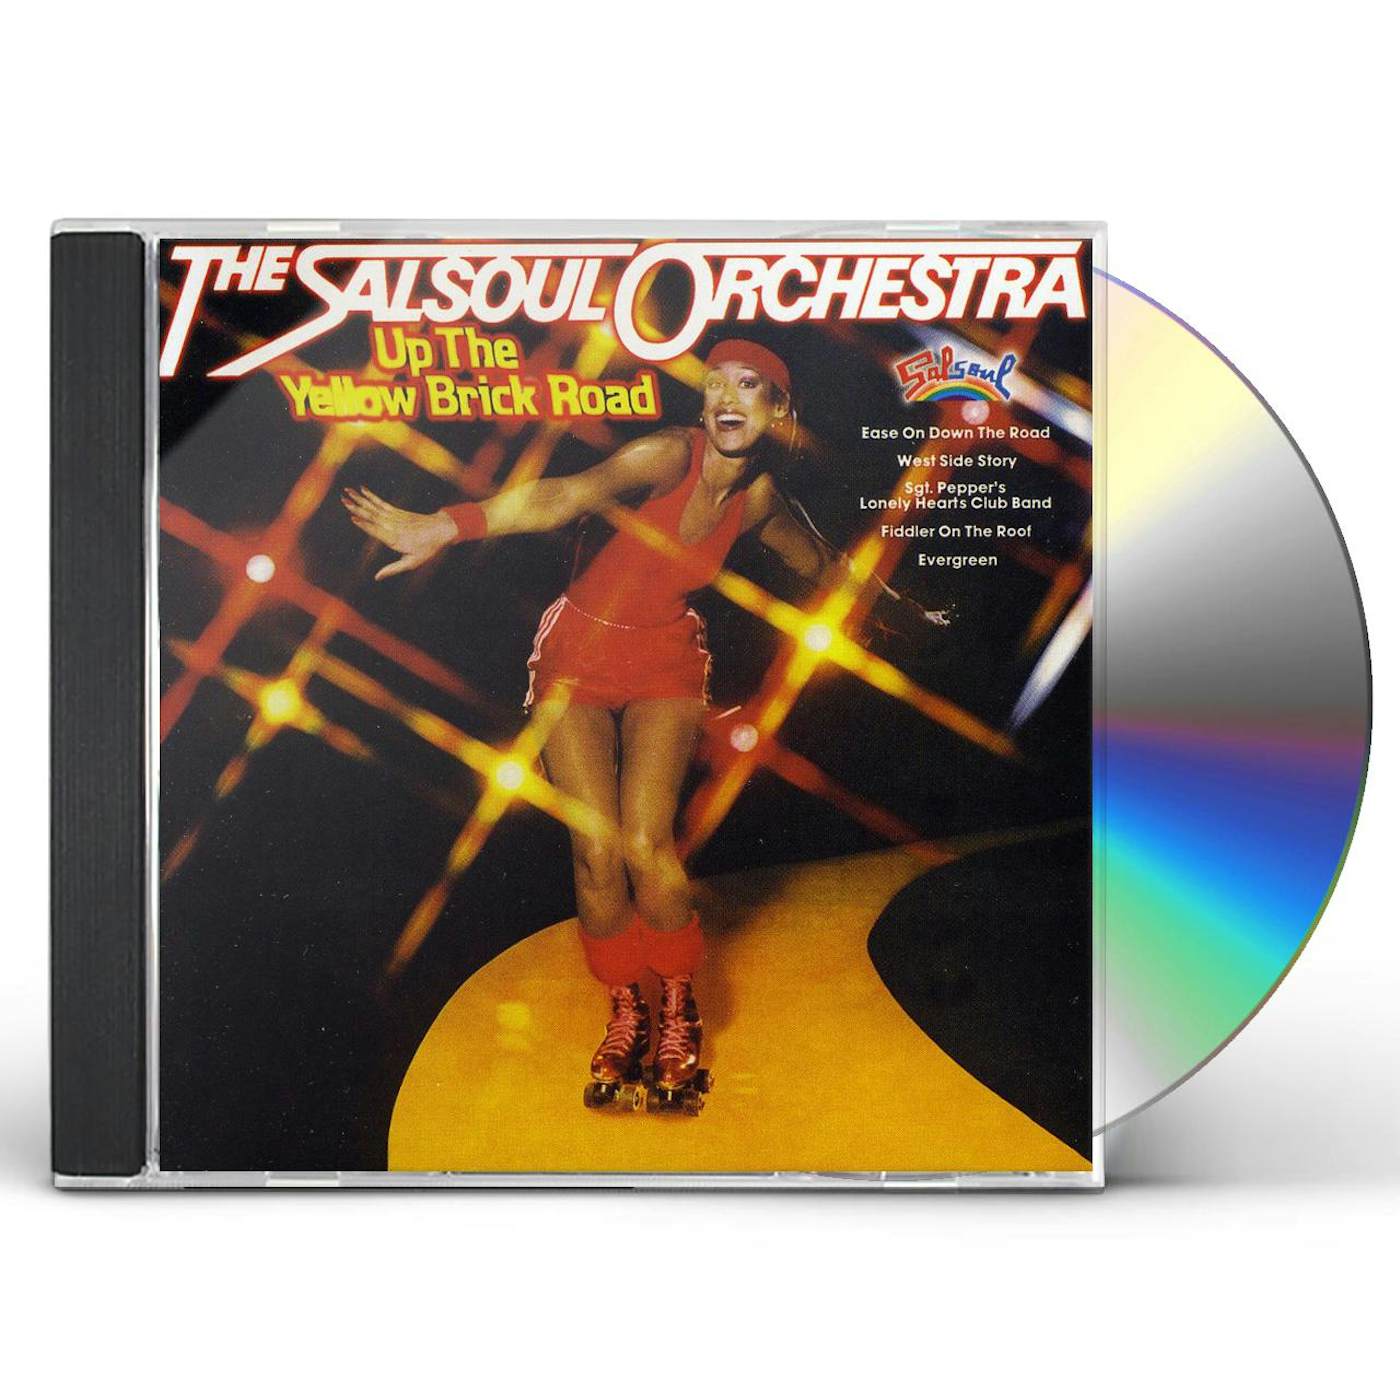 The Salsoul Orchestra UP THE YELLOW BRICK ROAD CD